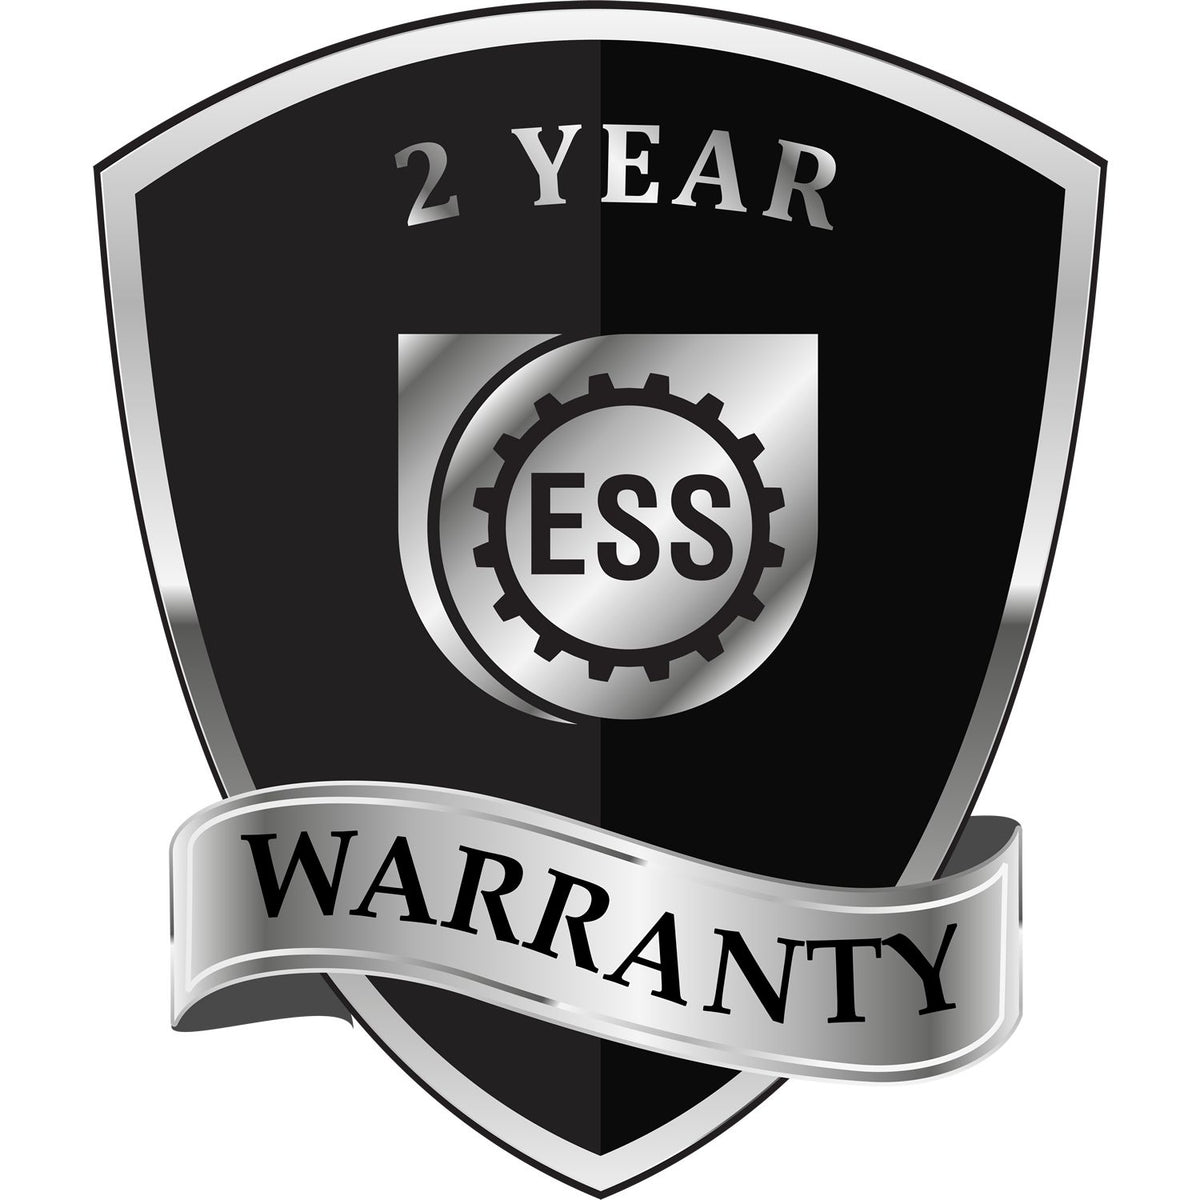 A badge or emblem showing a warranty icon for the Heavy Duty Cast Iron Indiana Engineer Seal Embosser